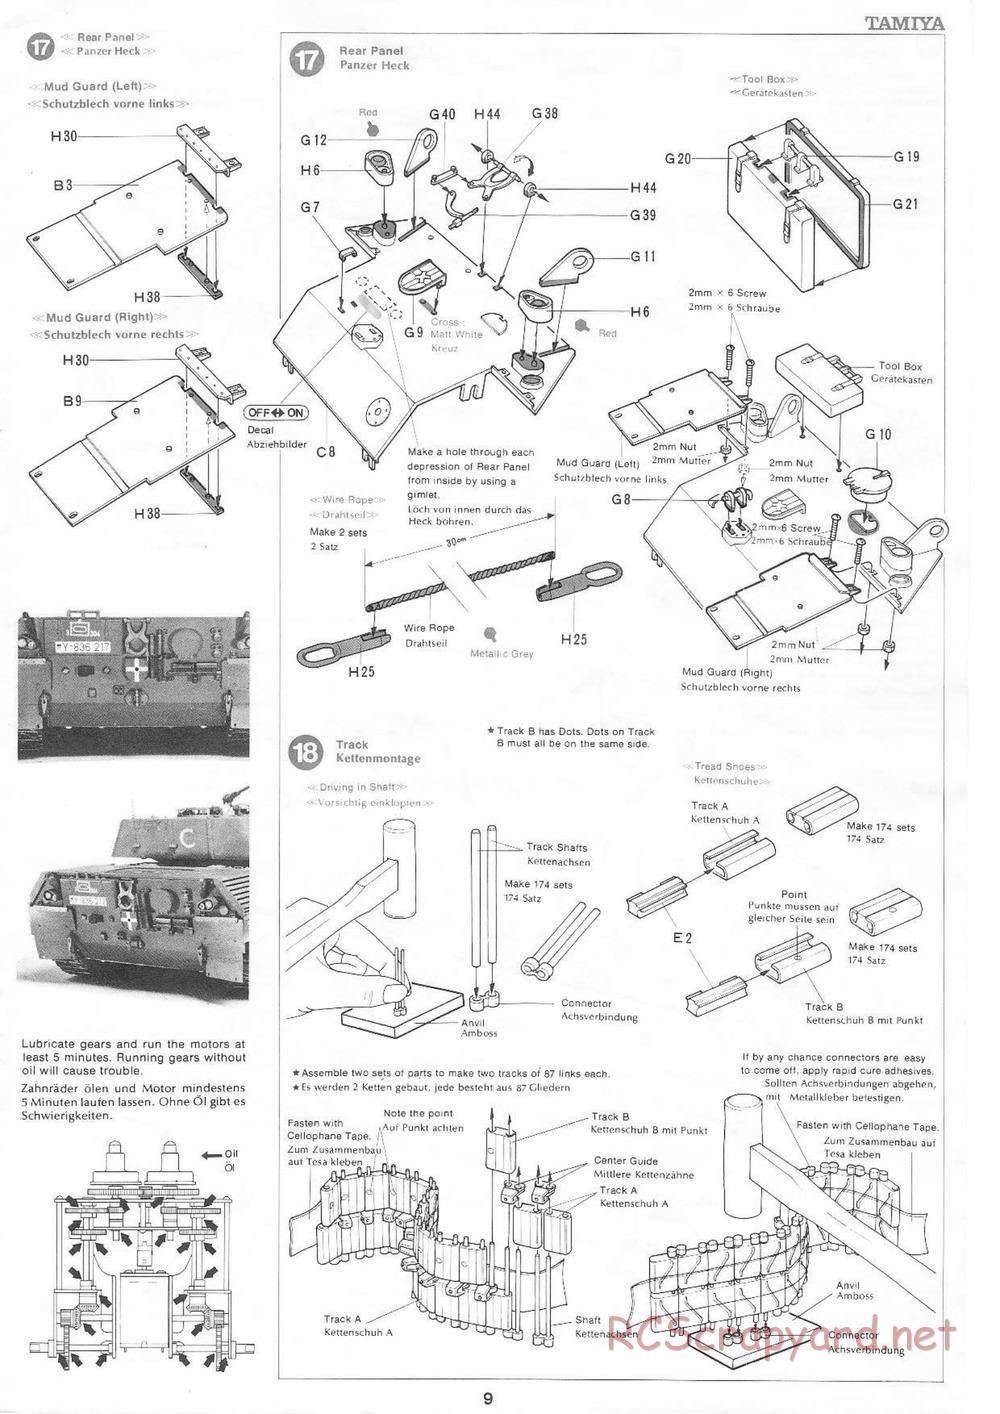 Tamiya - Leopard A4 - 1/16 Scale Chassis - Manual - Page 9